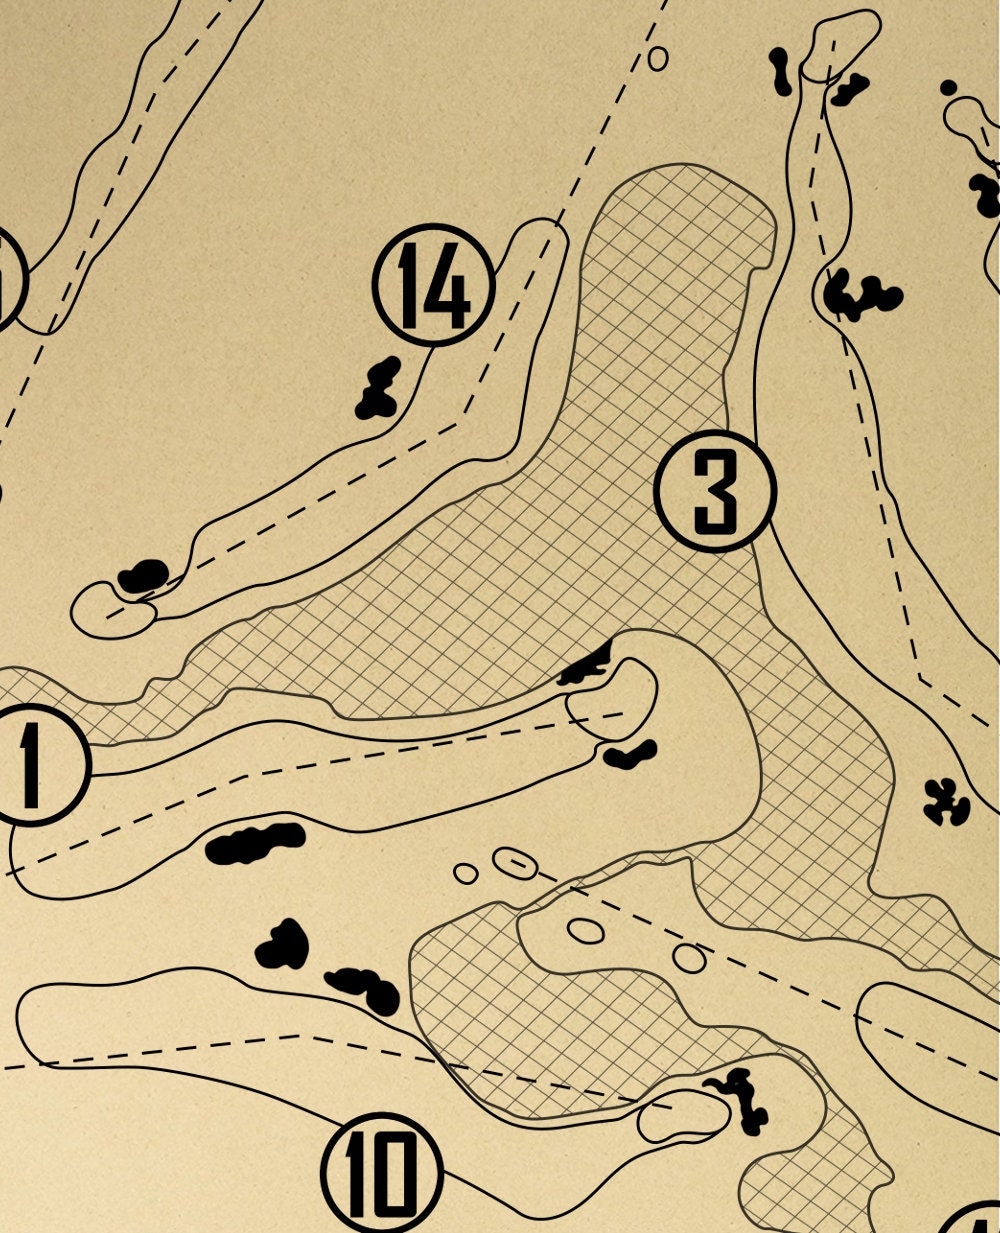 Edgewood Tahoe Golf Course Outline (Print)